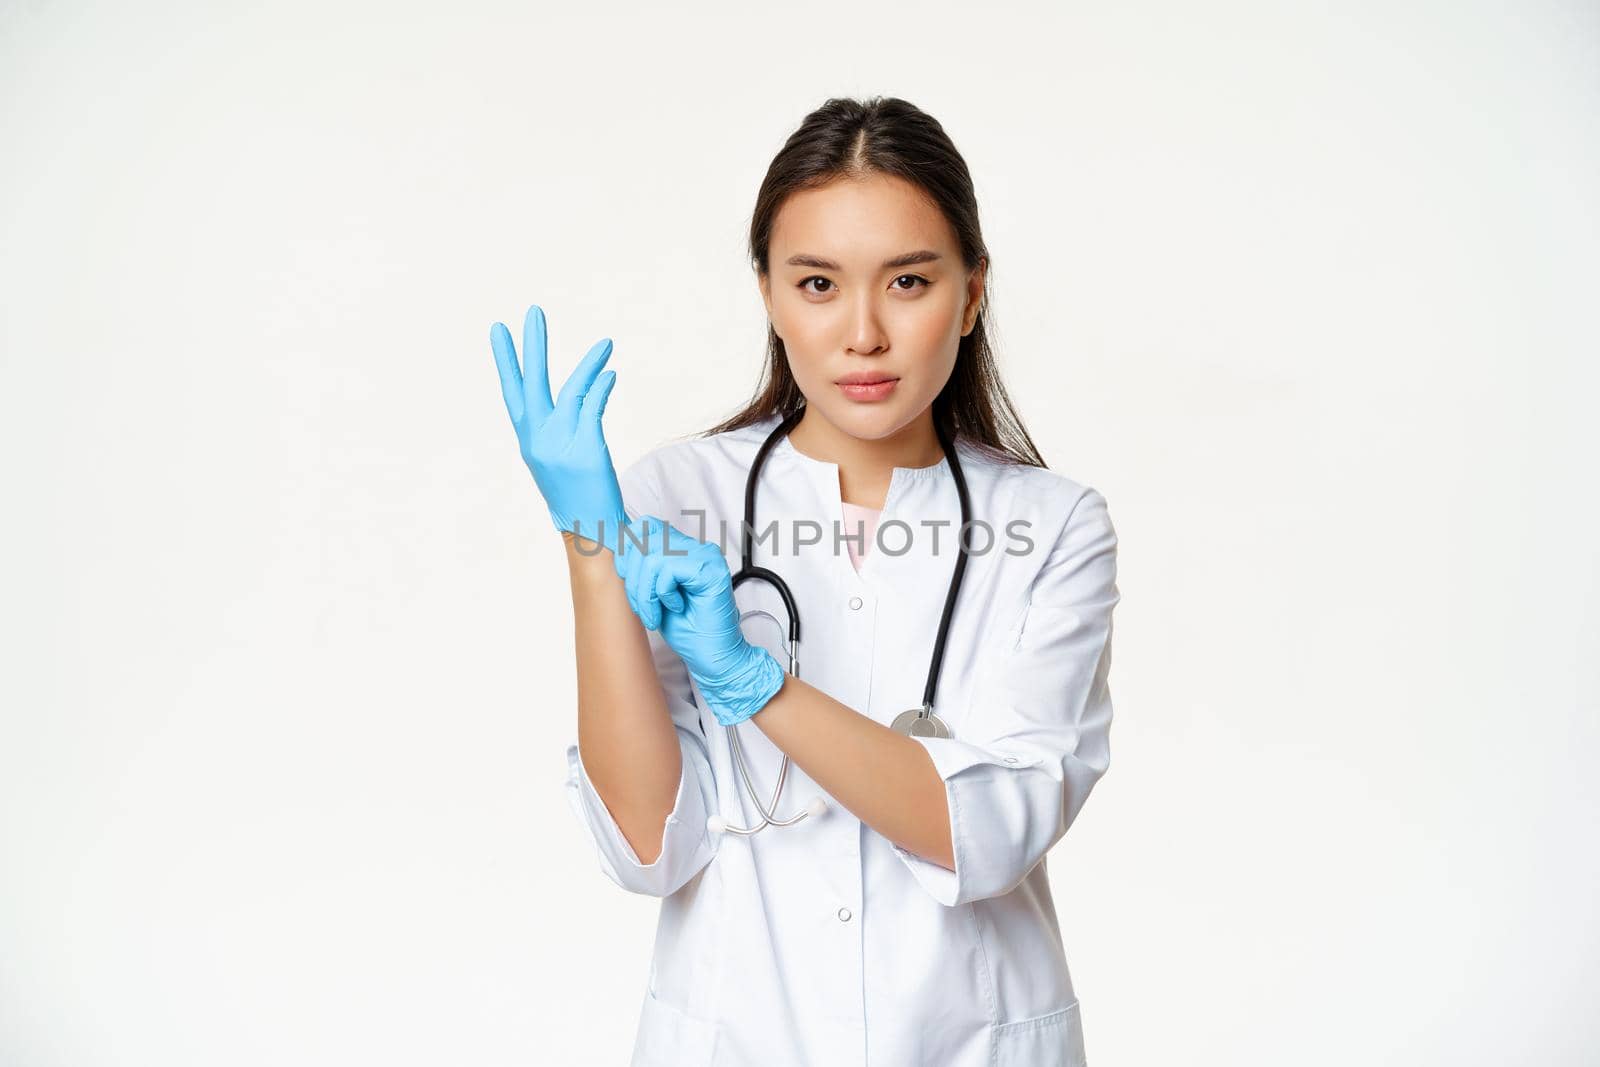 Confident female nurse, physician put on rubber medical gloves for patient clinical examination, standing serious in healthcare worker uniform, white background.